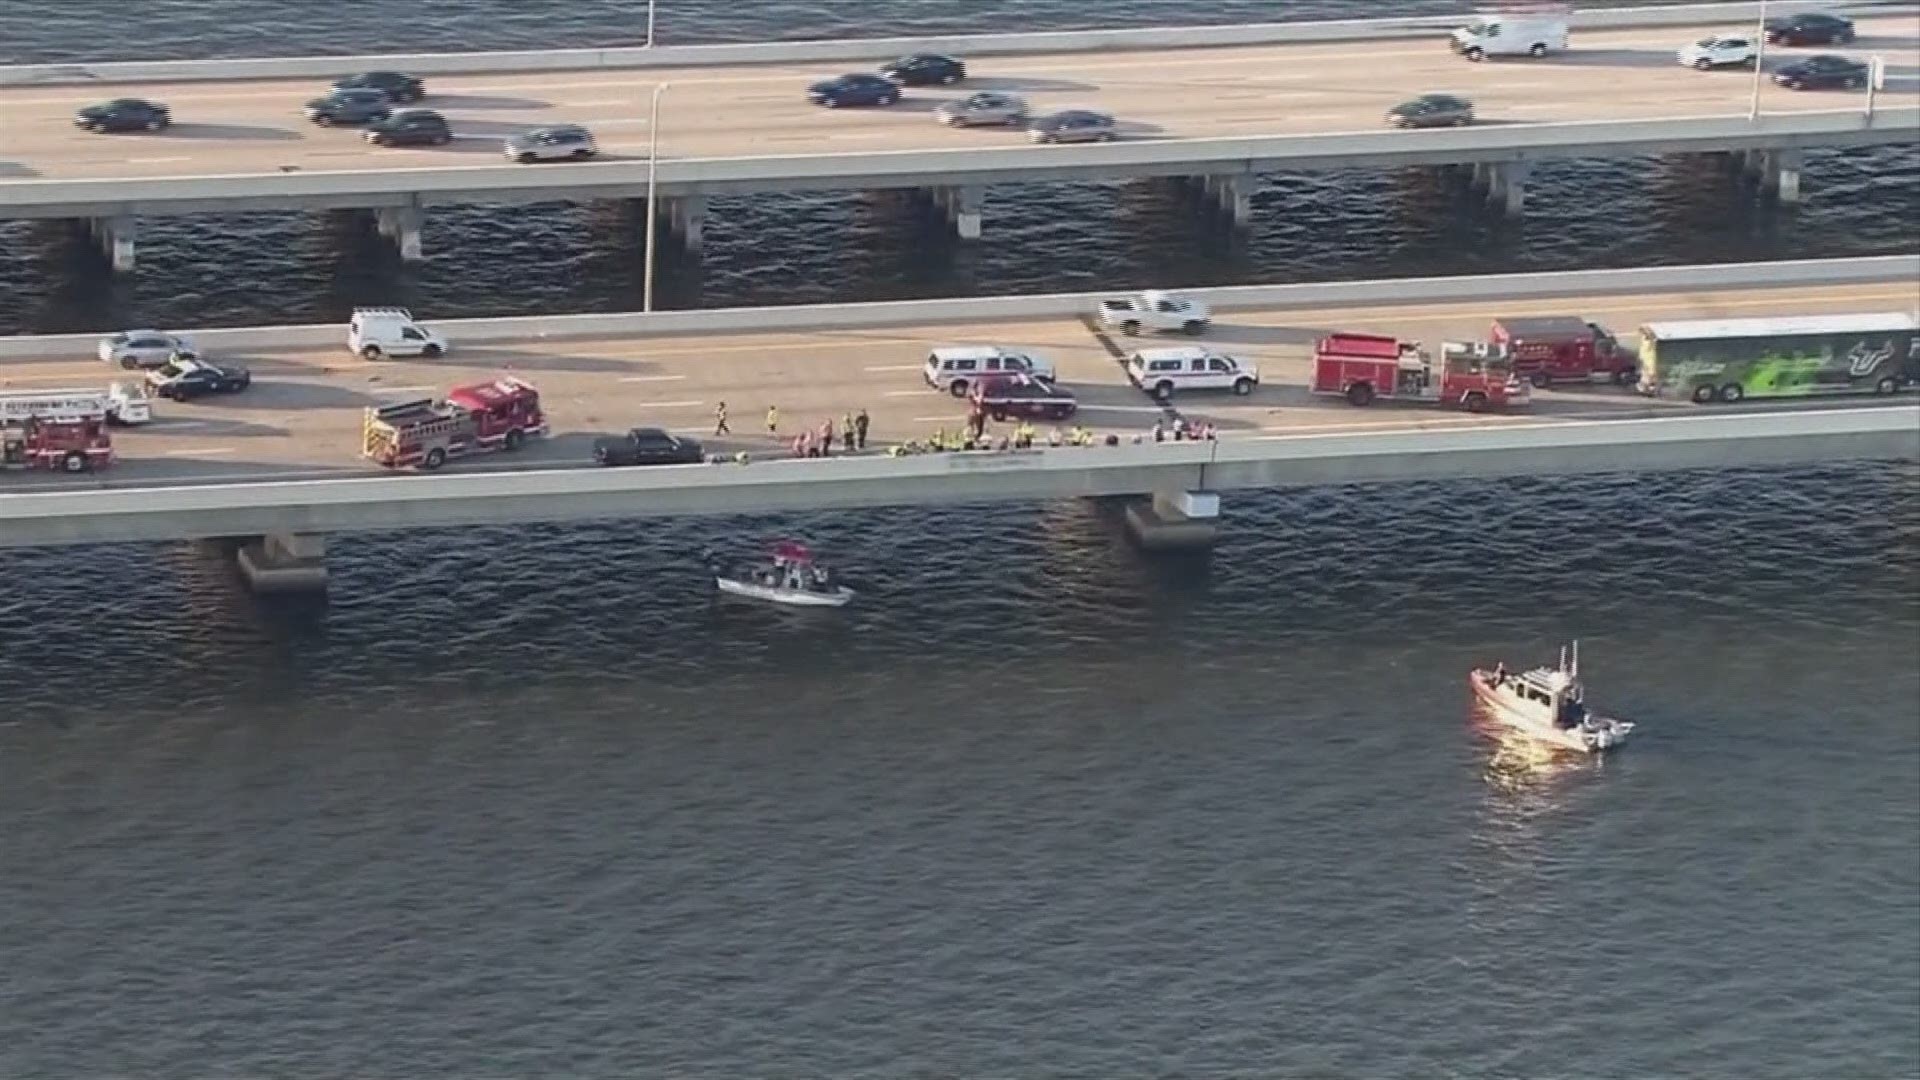 Rescue divers are in the water off the Howard Frankland Bridge, as they search for a car that went off the roadway and into Tampa Bay during a crash Wednesday morning. 
https://on.wtsp.com/2U9jbJz